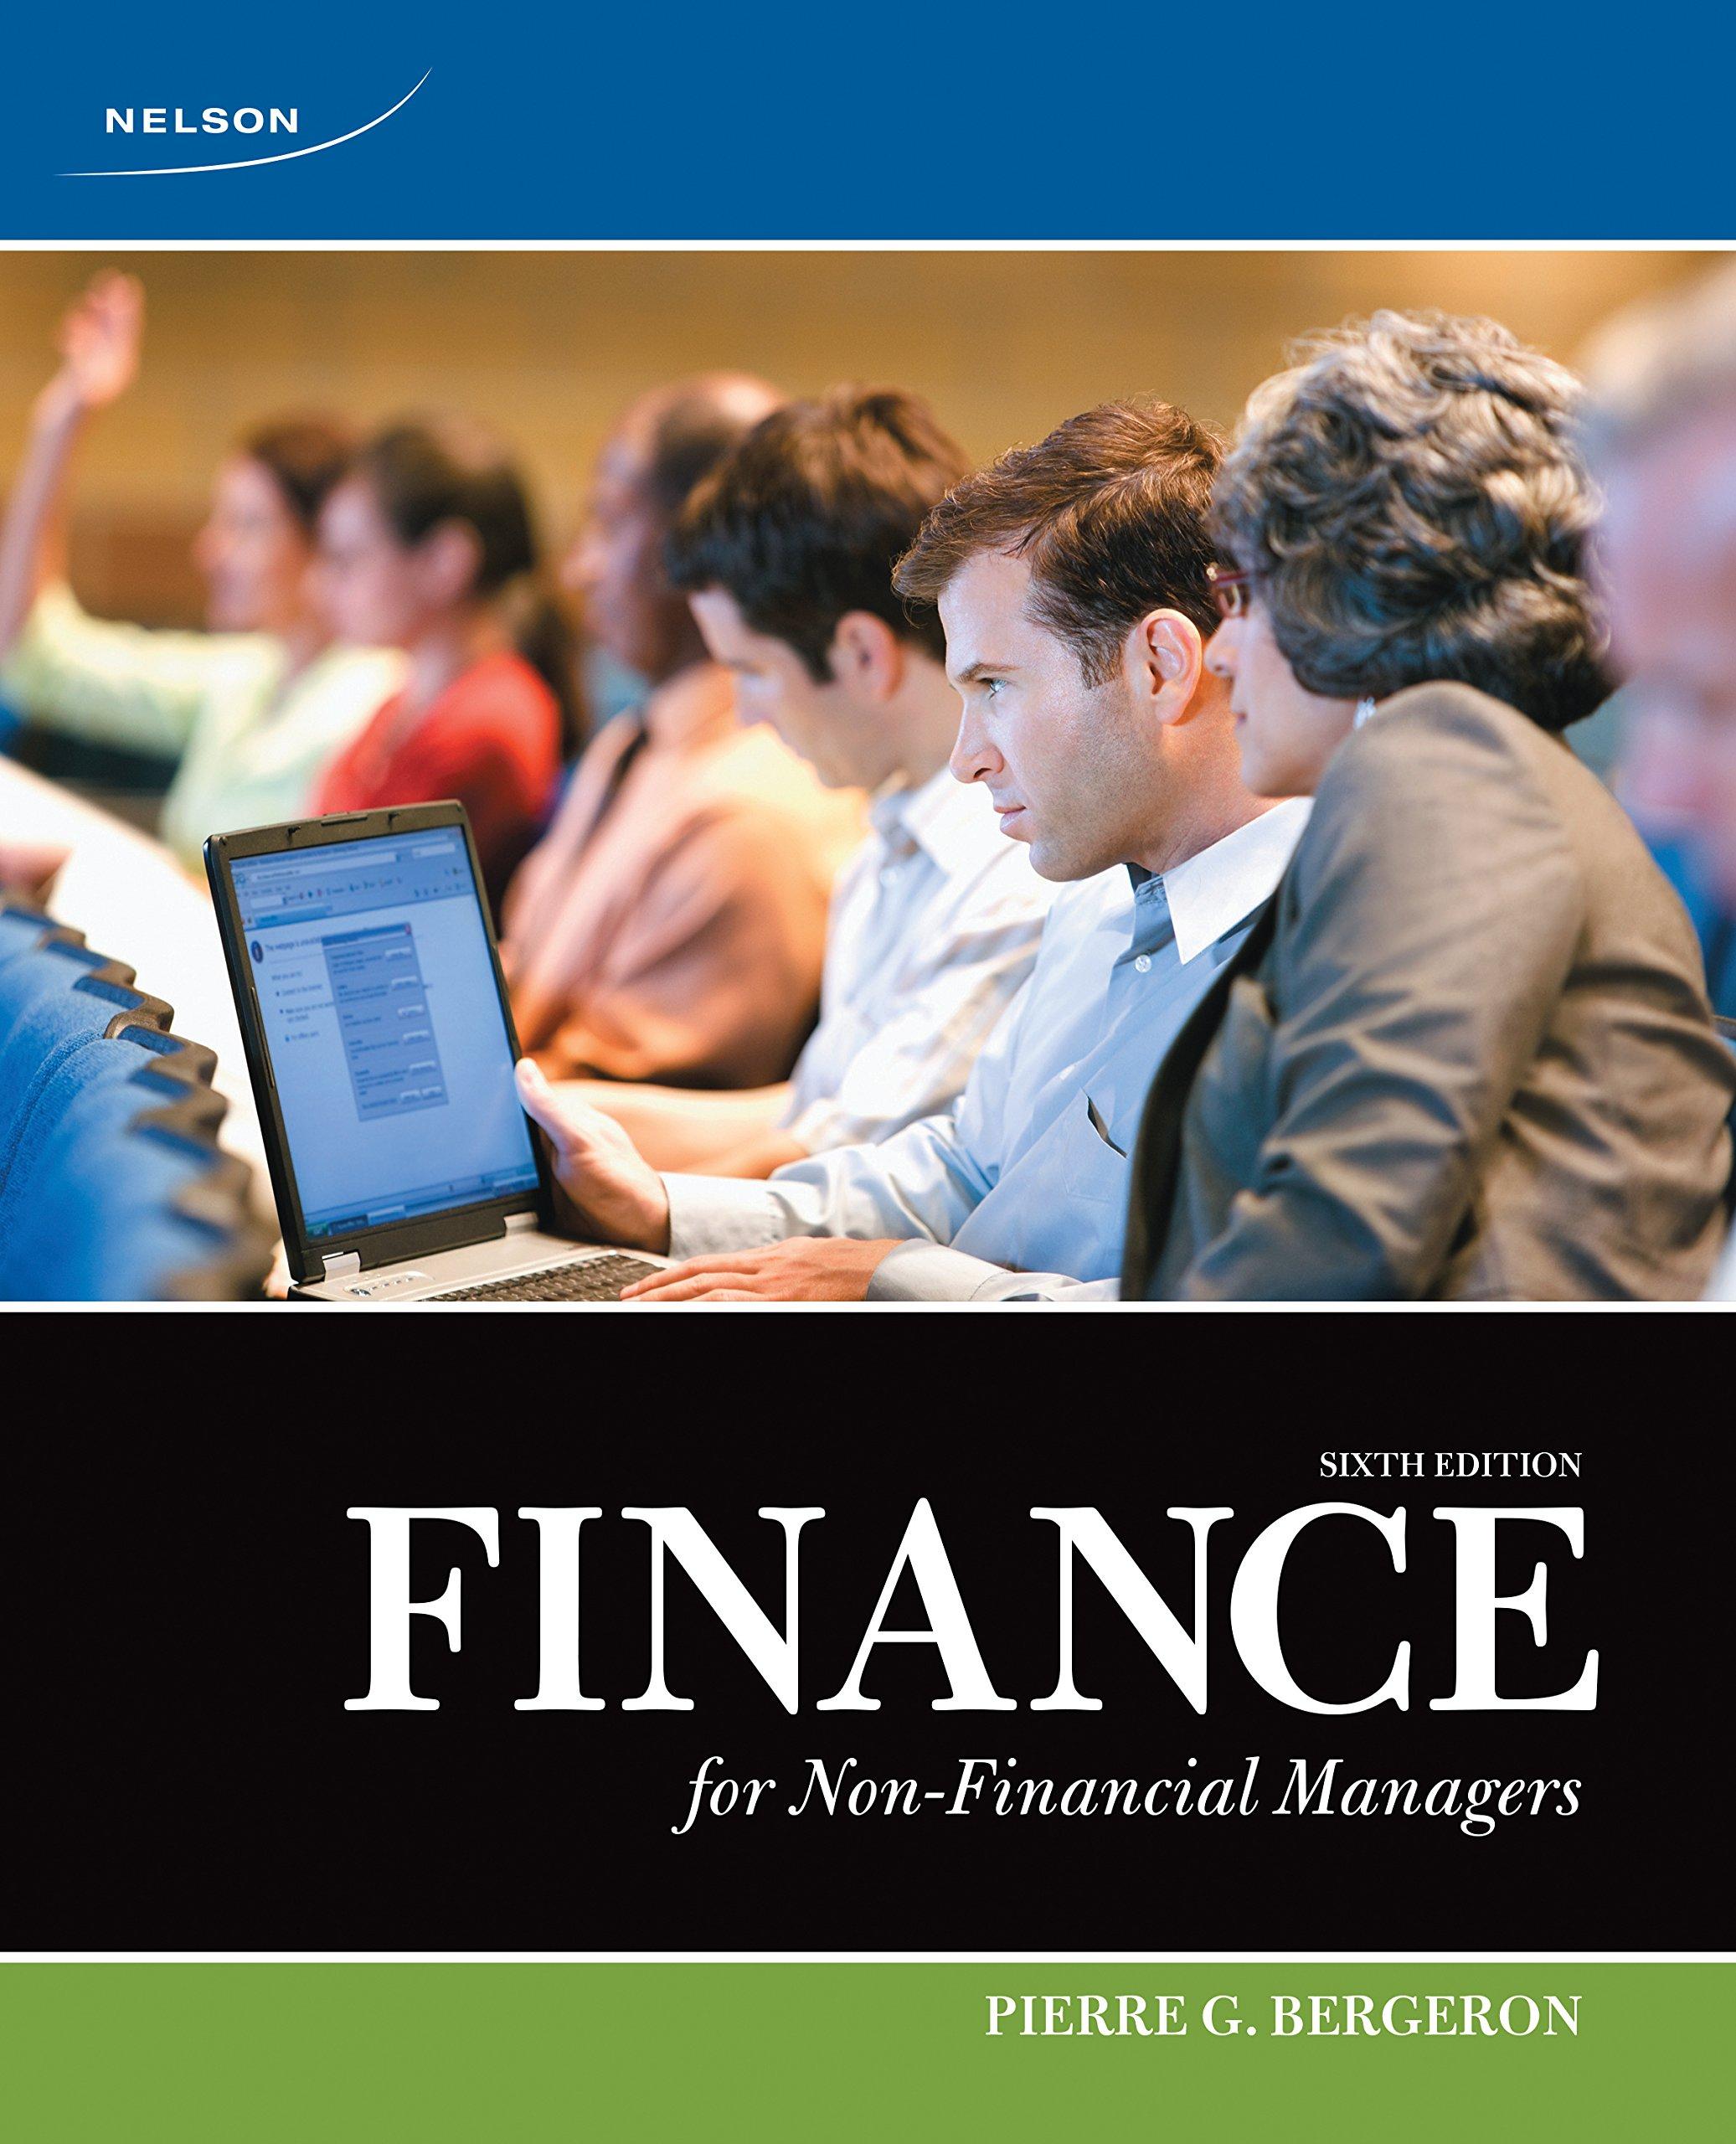 finance for non financial managers 6th edition pierre bergeron 0176501630, 9780176501631